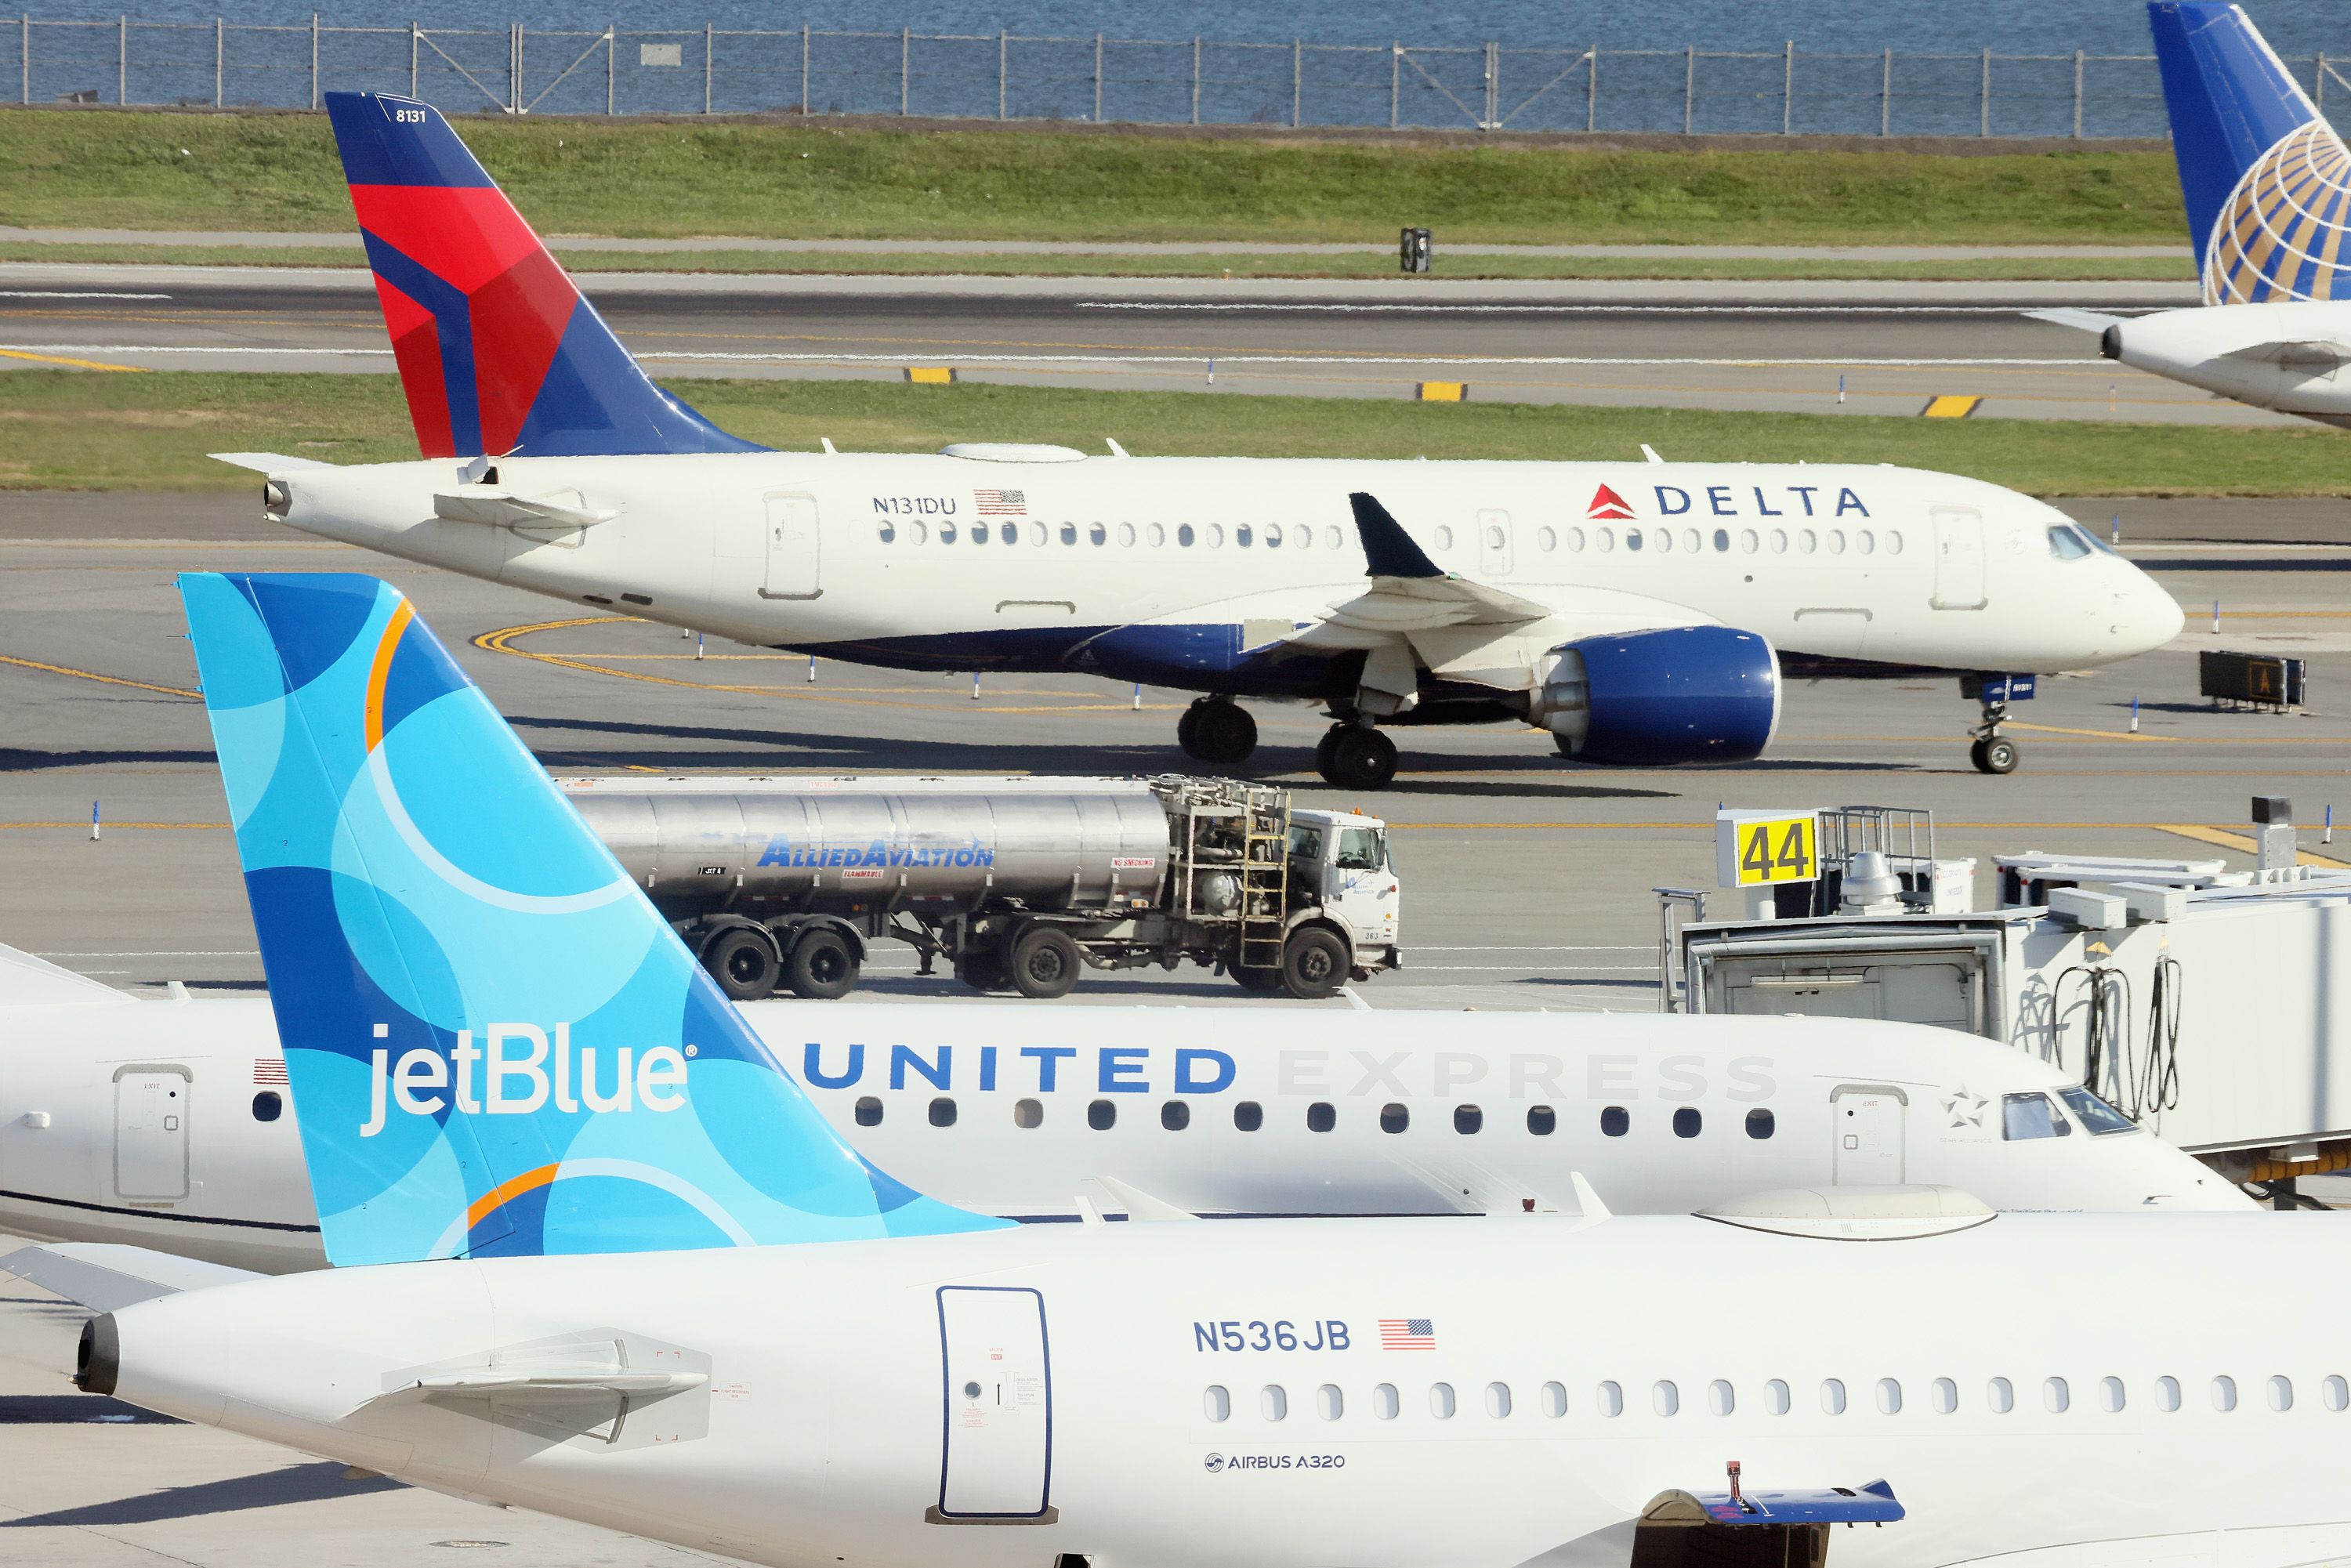 Delta, JetBlue, United airlines planes at airport 